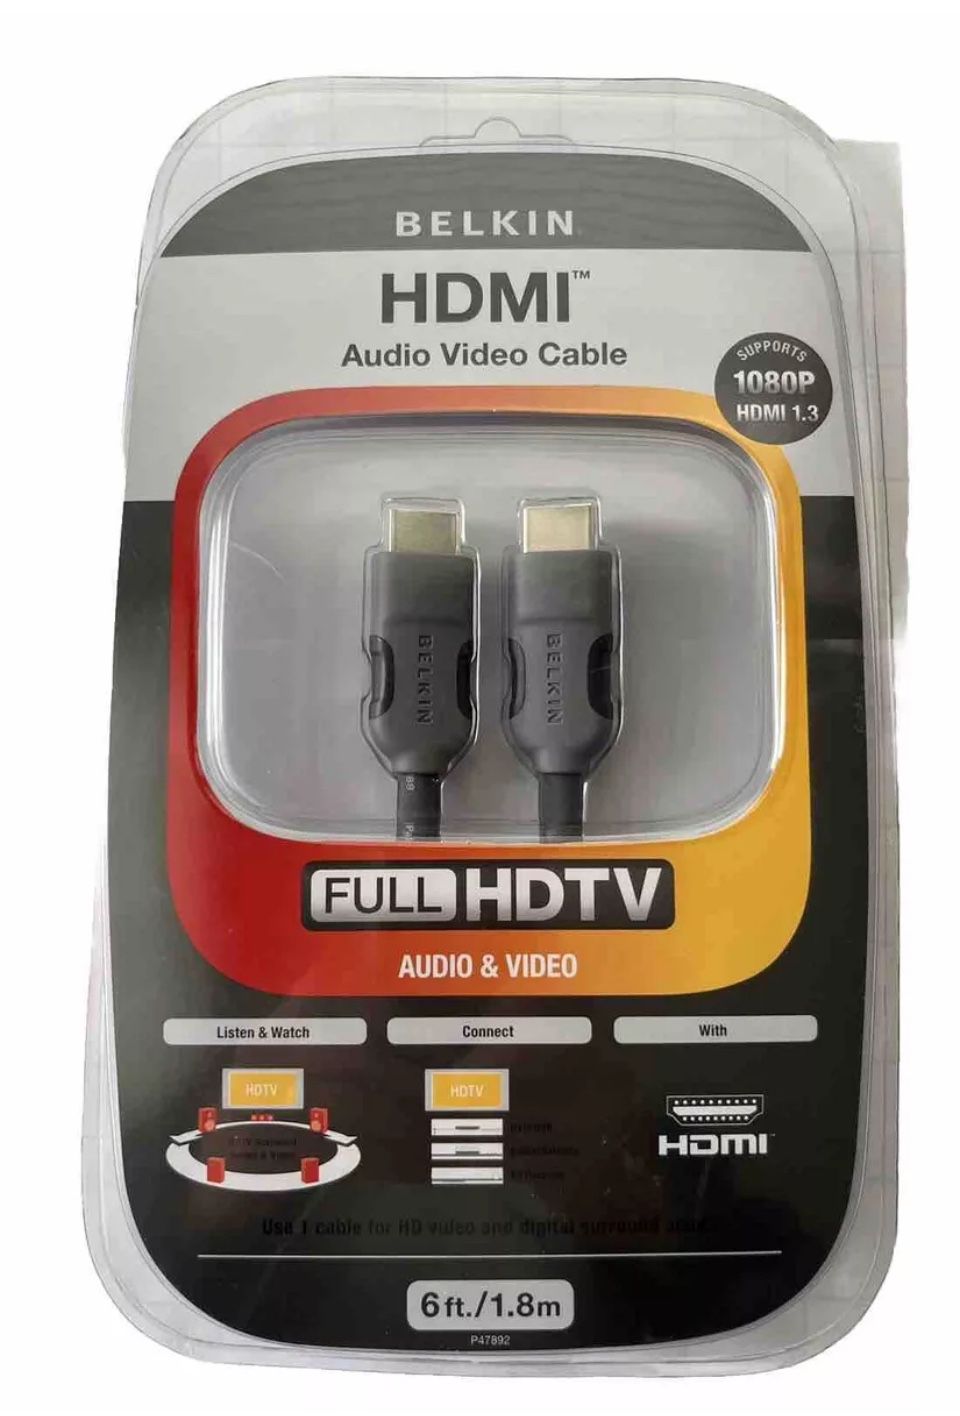 BELKIN HDMI 6FT AUDIO VIDEO CABLE AM22302-06  1080P HDMI 1.3 – FULL HD TV,NEW